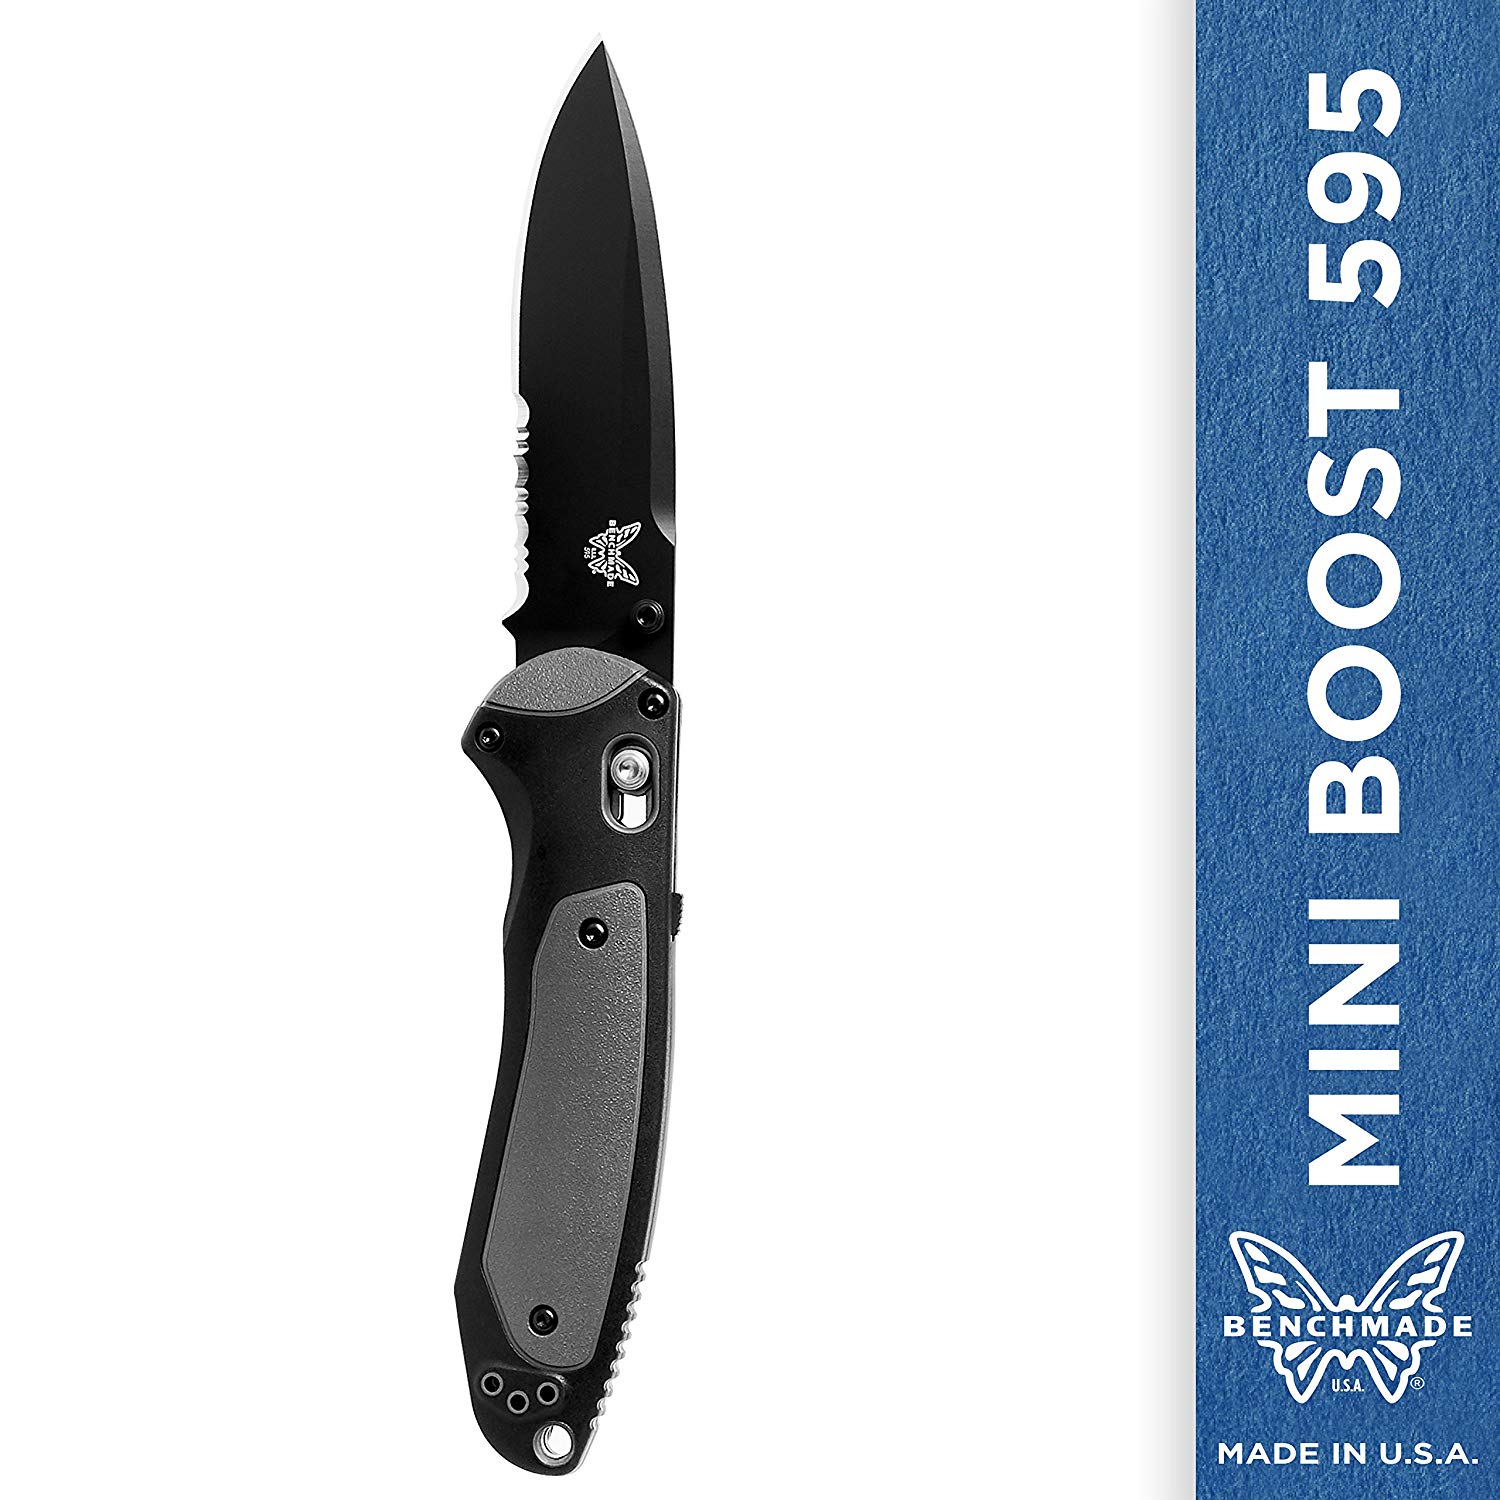 Benchmade Mini Boost 595 Knife - Serrated Drop-point - Coated Finish